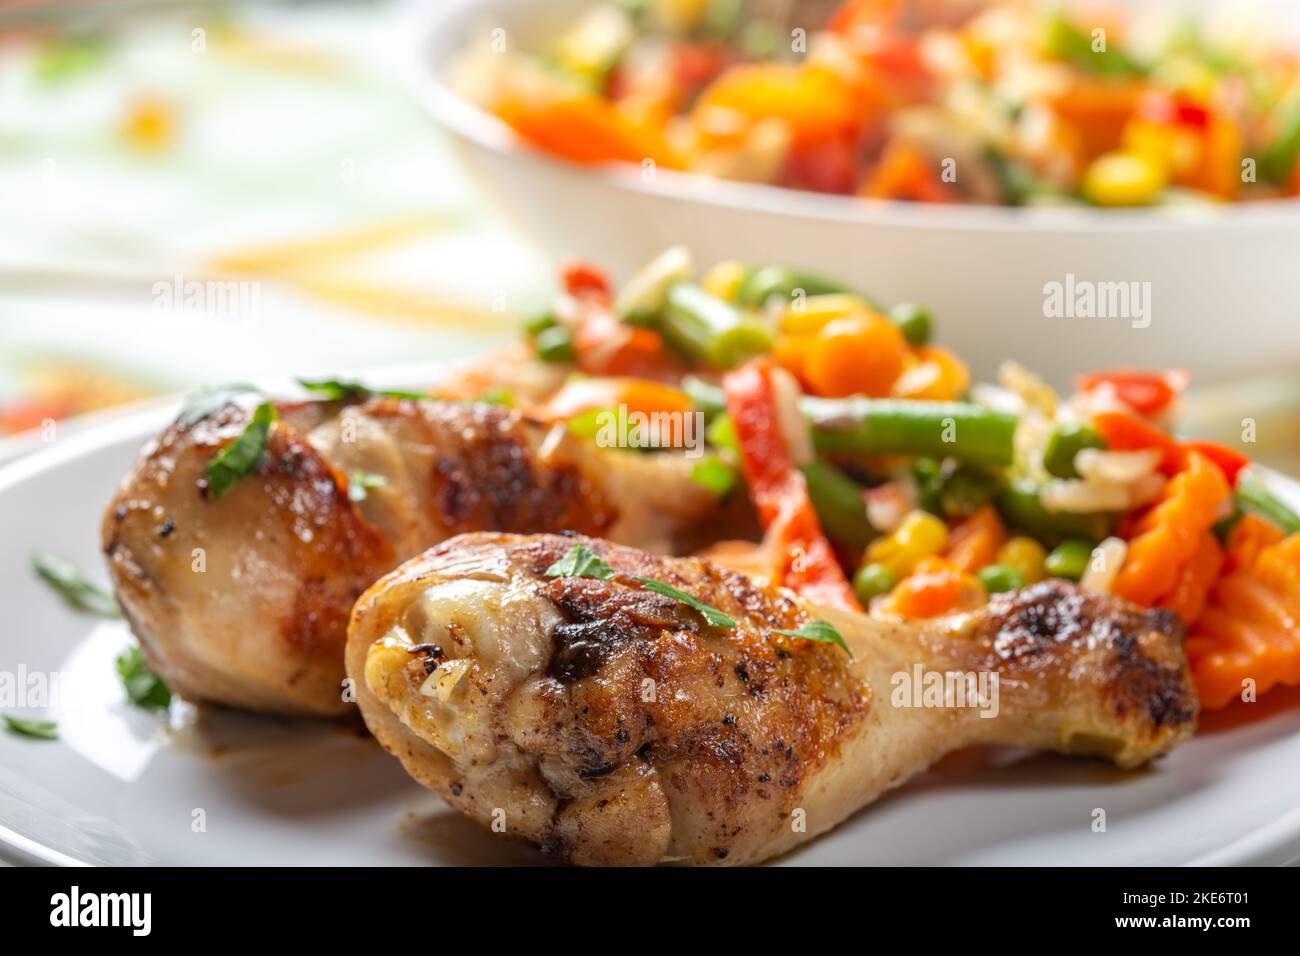 Grilled chicken legs with vegetables - close up view Stock Photo